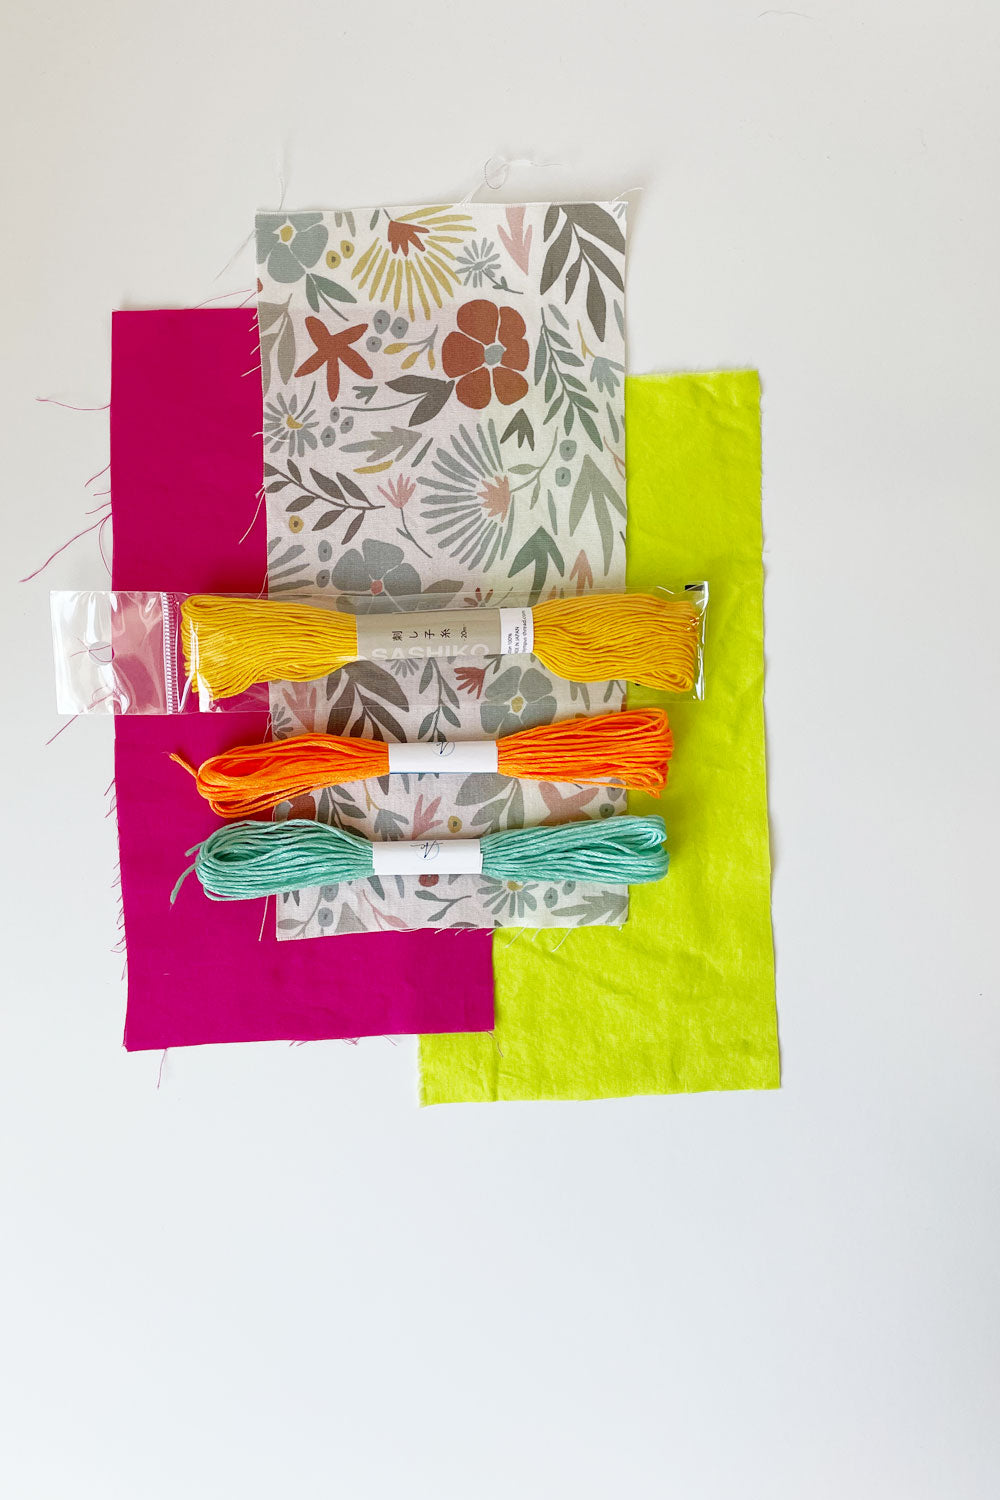 3 fabric swatches with sashiko thread and 2 embroidery floss laying on top. Floral print colors are rust, yellow, and steel blue on white background. Bright fuchsia and neon light green fabrics. Sashiko thread in yellow with embroidery threads in orange and sea foam green.